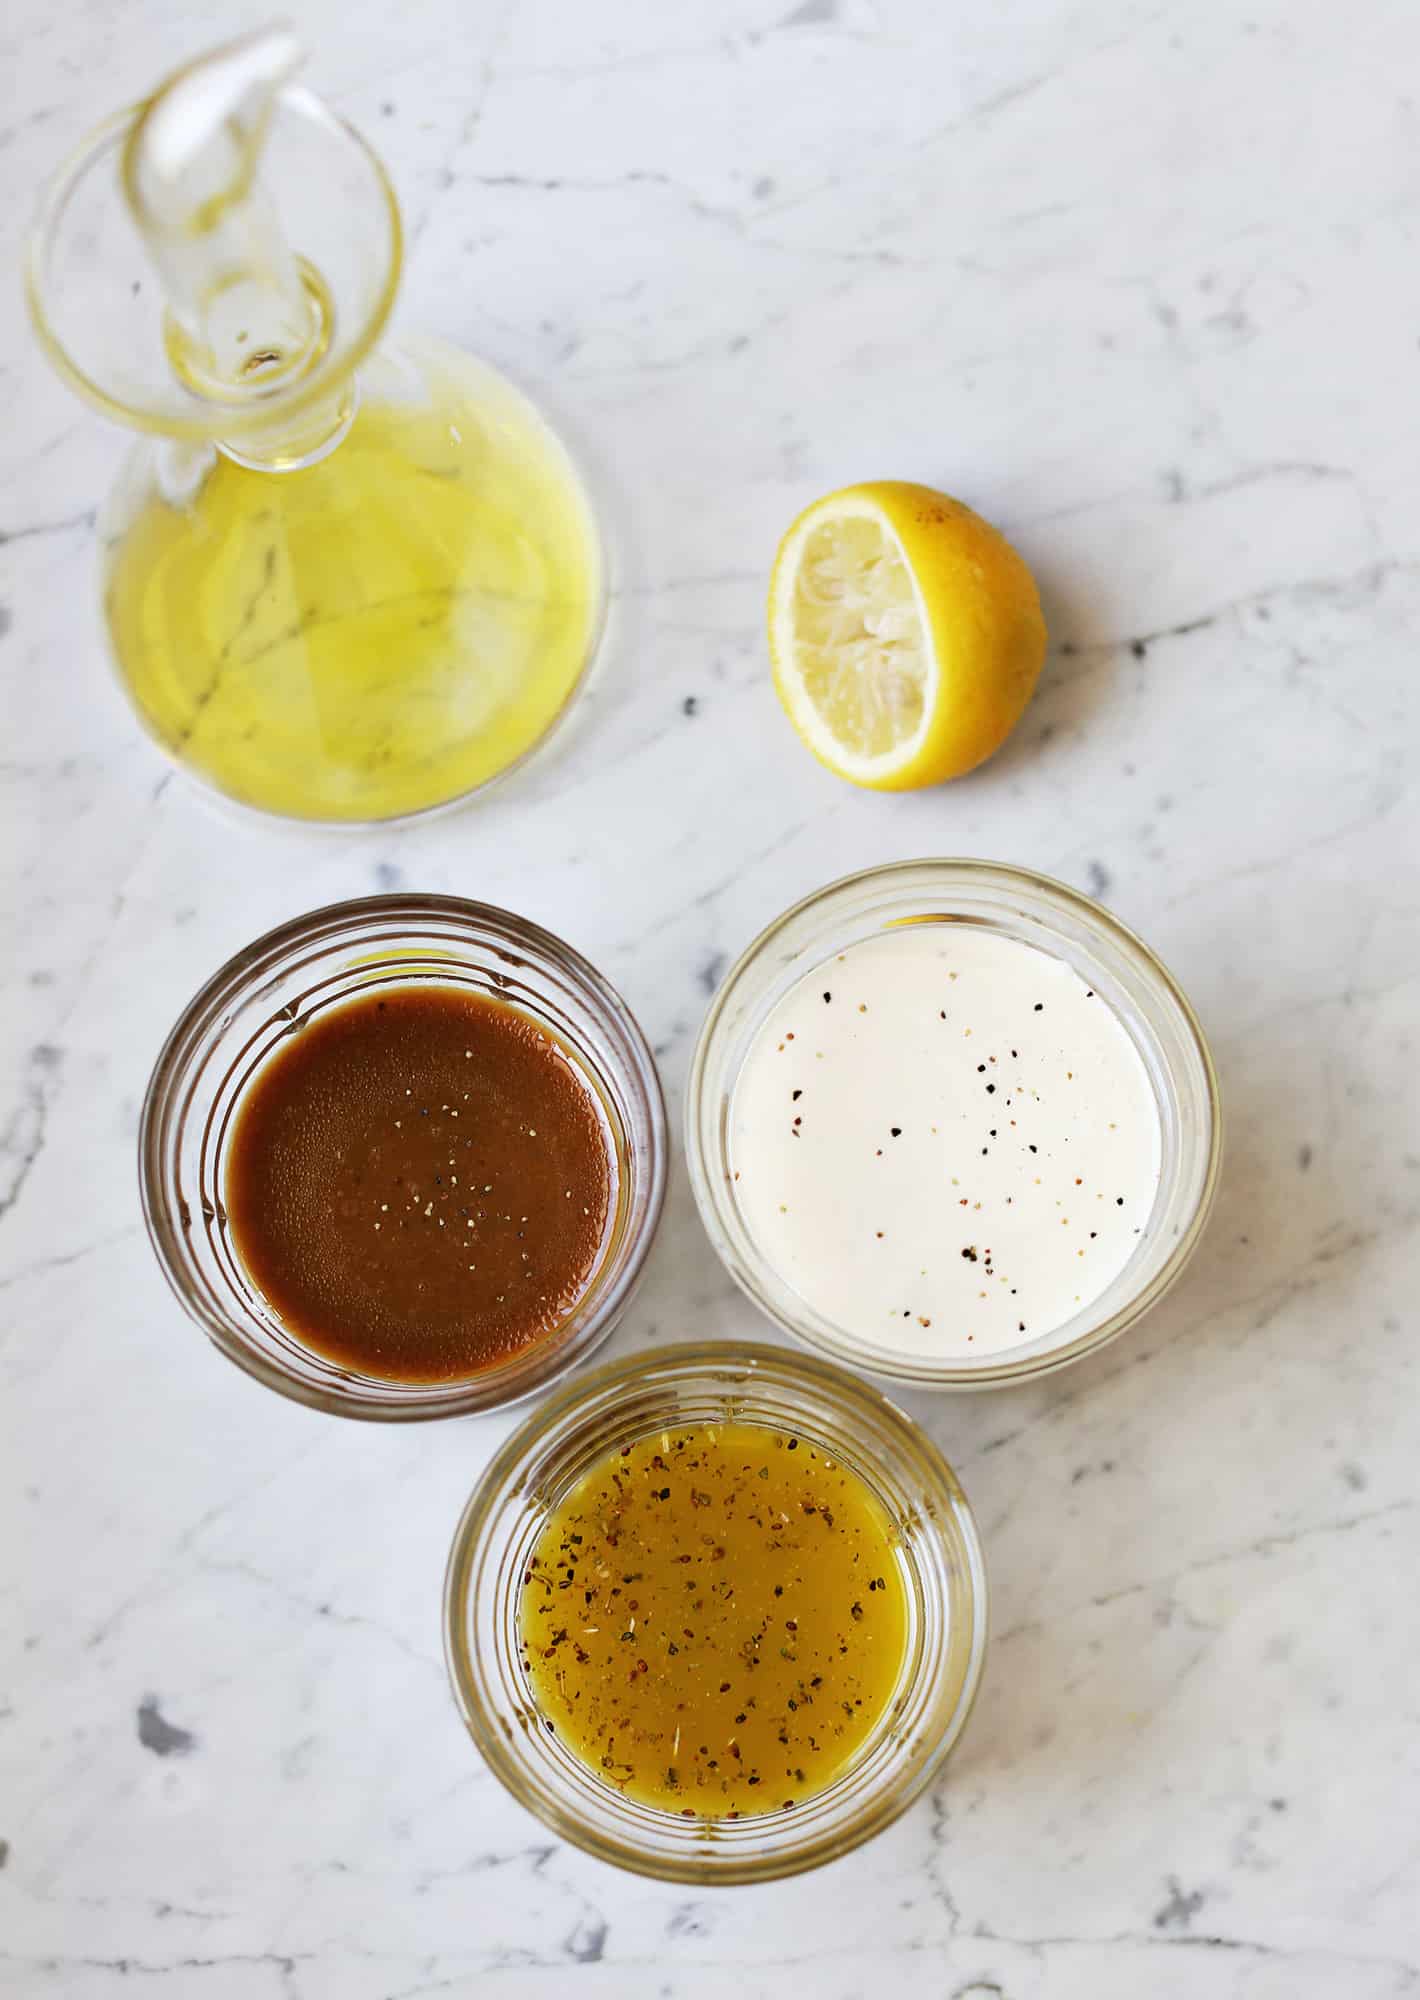 3 glass bowls of sauces, half a lemon, and a glass bottle of yellow liquid